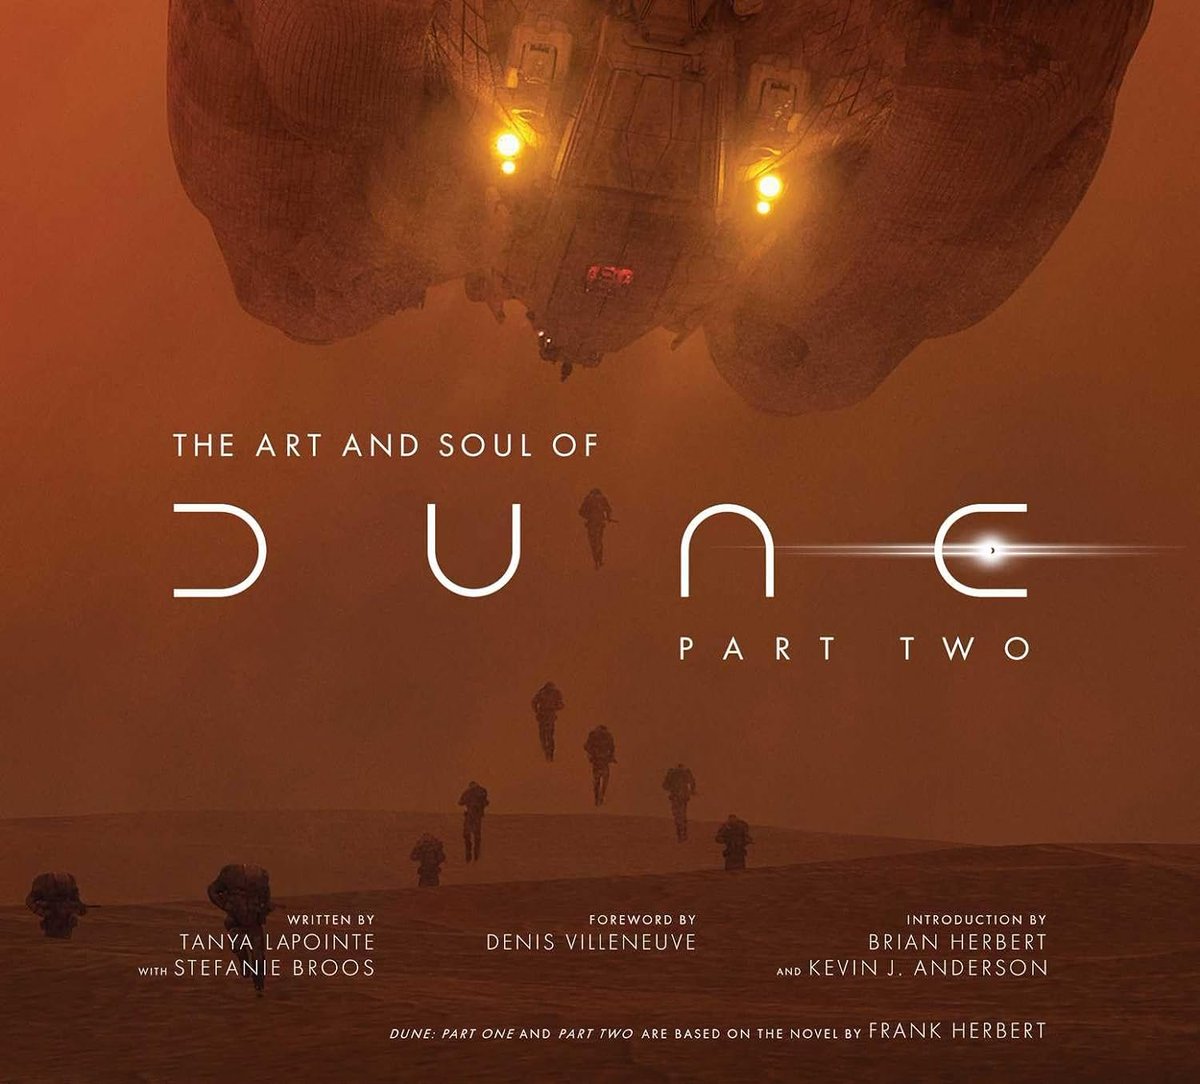 By the way, The release of Dune: Part Two means that The Art and Soul of Dune: Part Two is now available! 🔥 The book is 240 pages long, written by @TanyaLapointe and published by @insighteditions